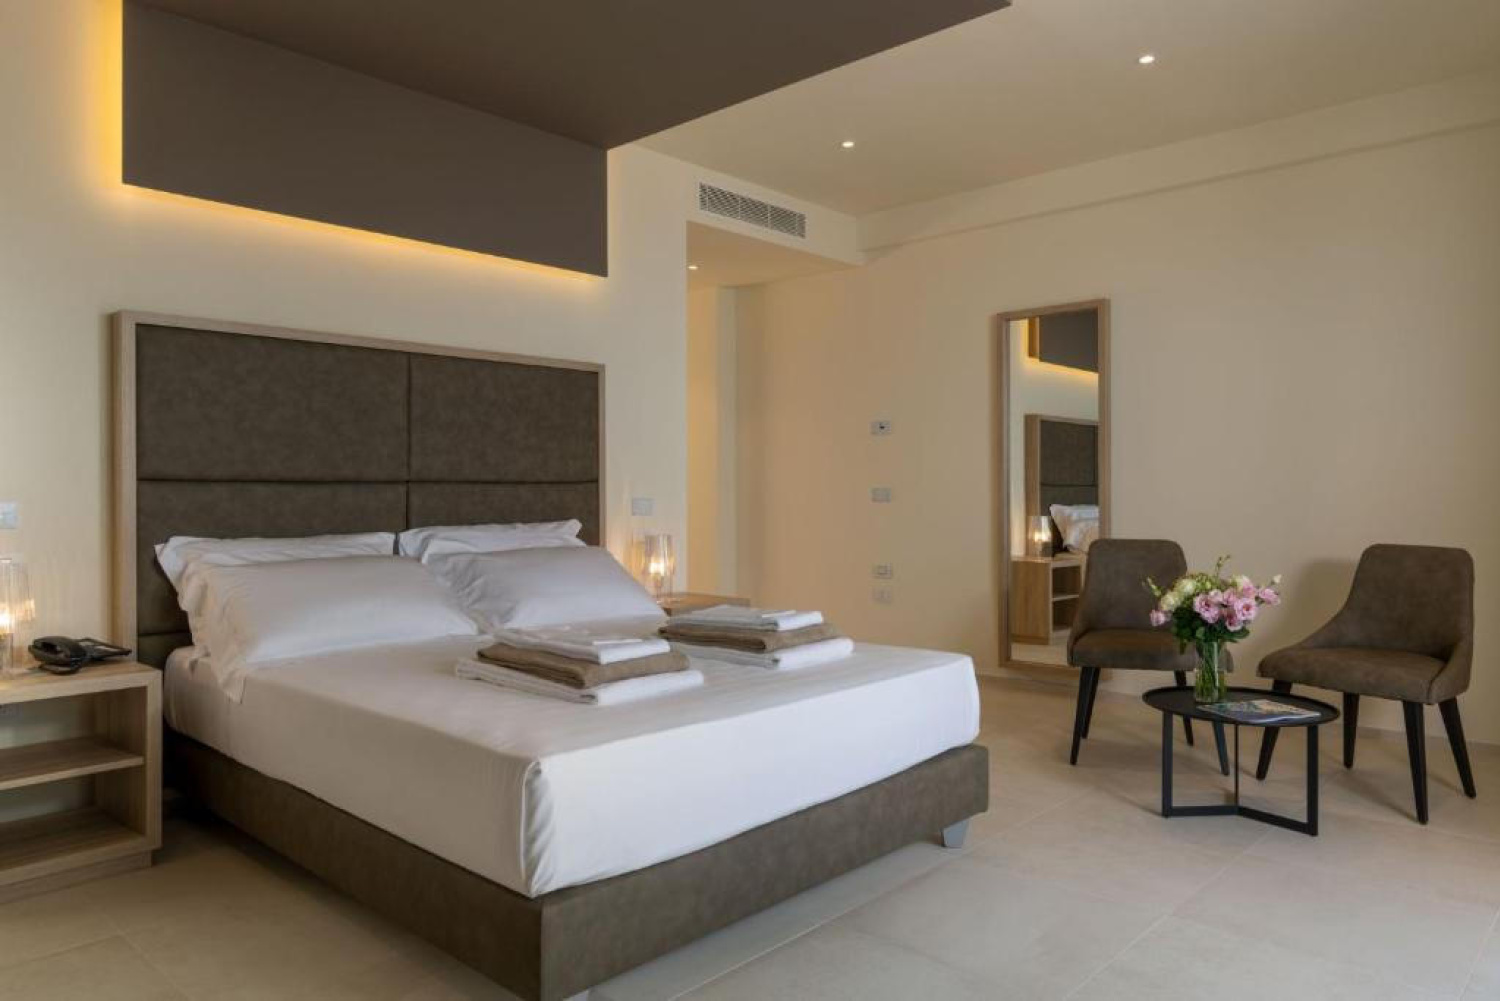 PALACE LIDO HOTEL & SUITES W CECINIE - IBFOR - Your design shop